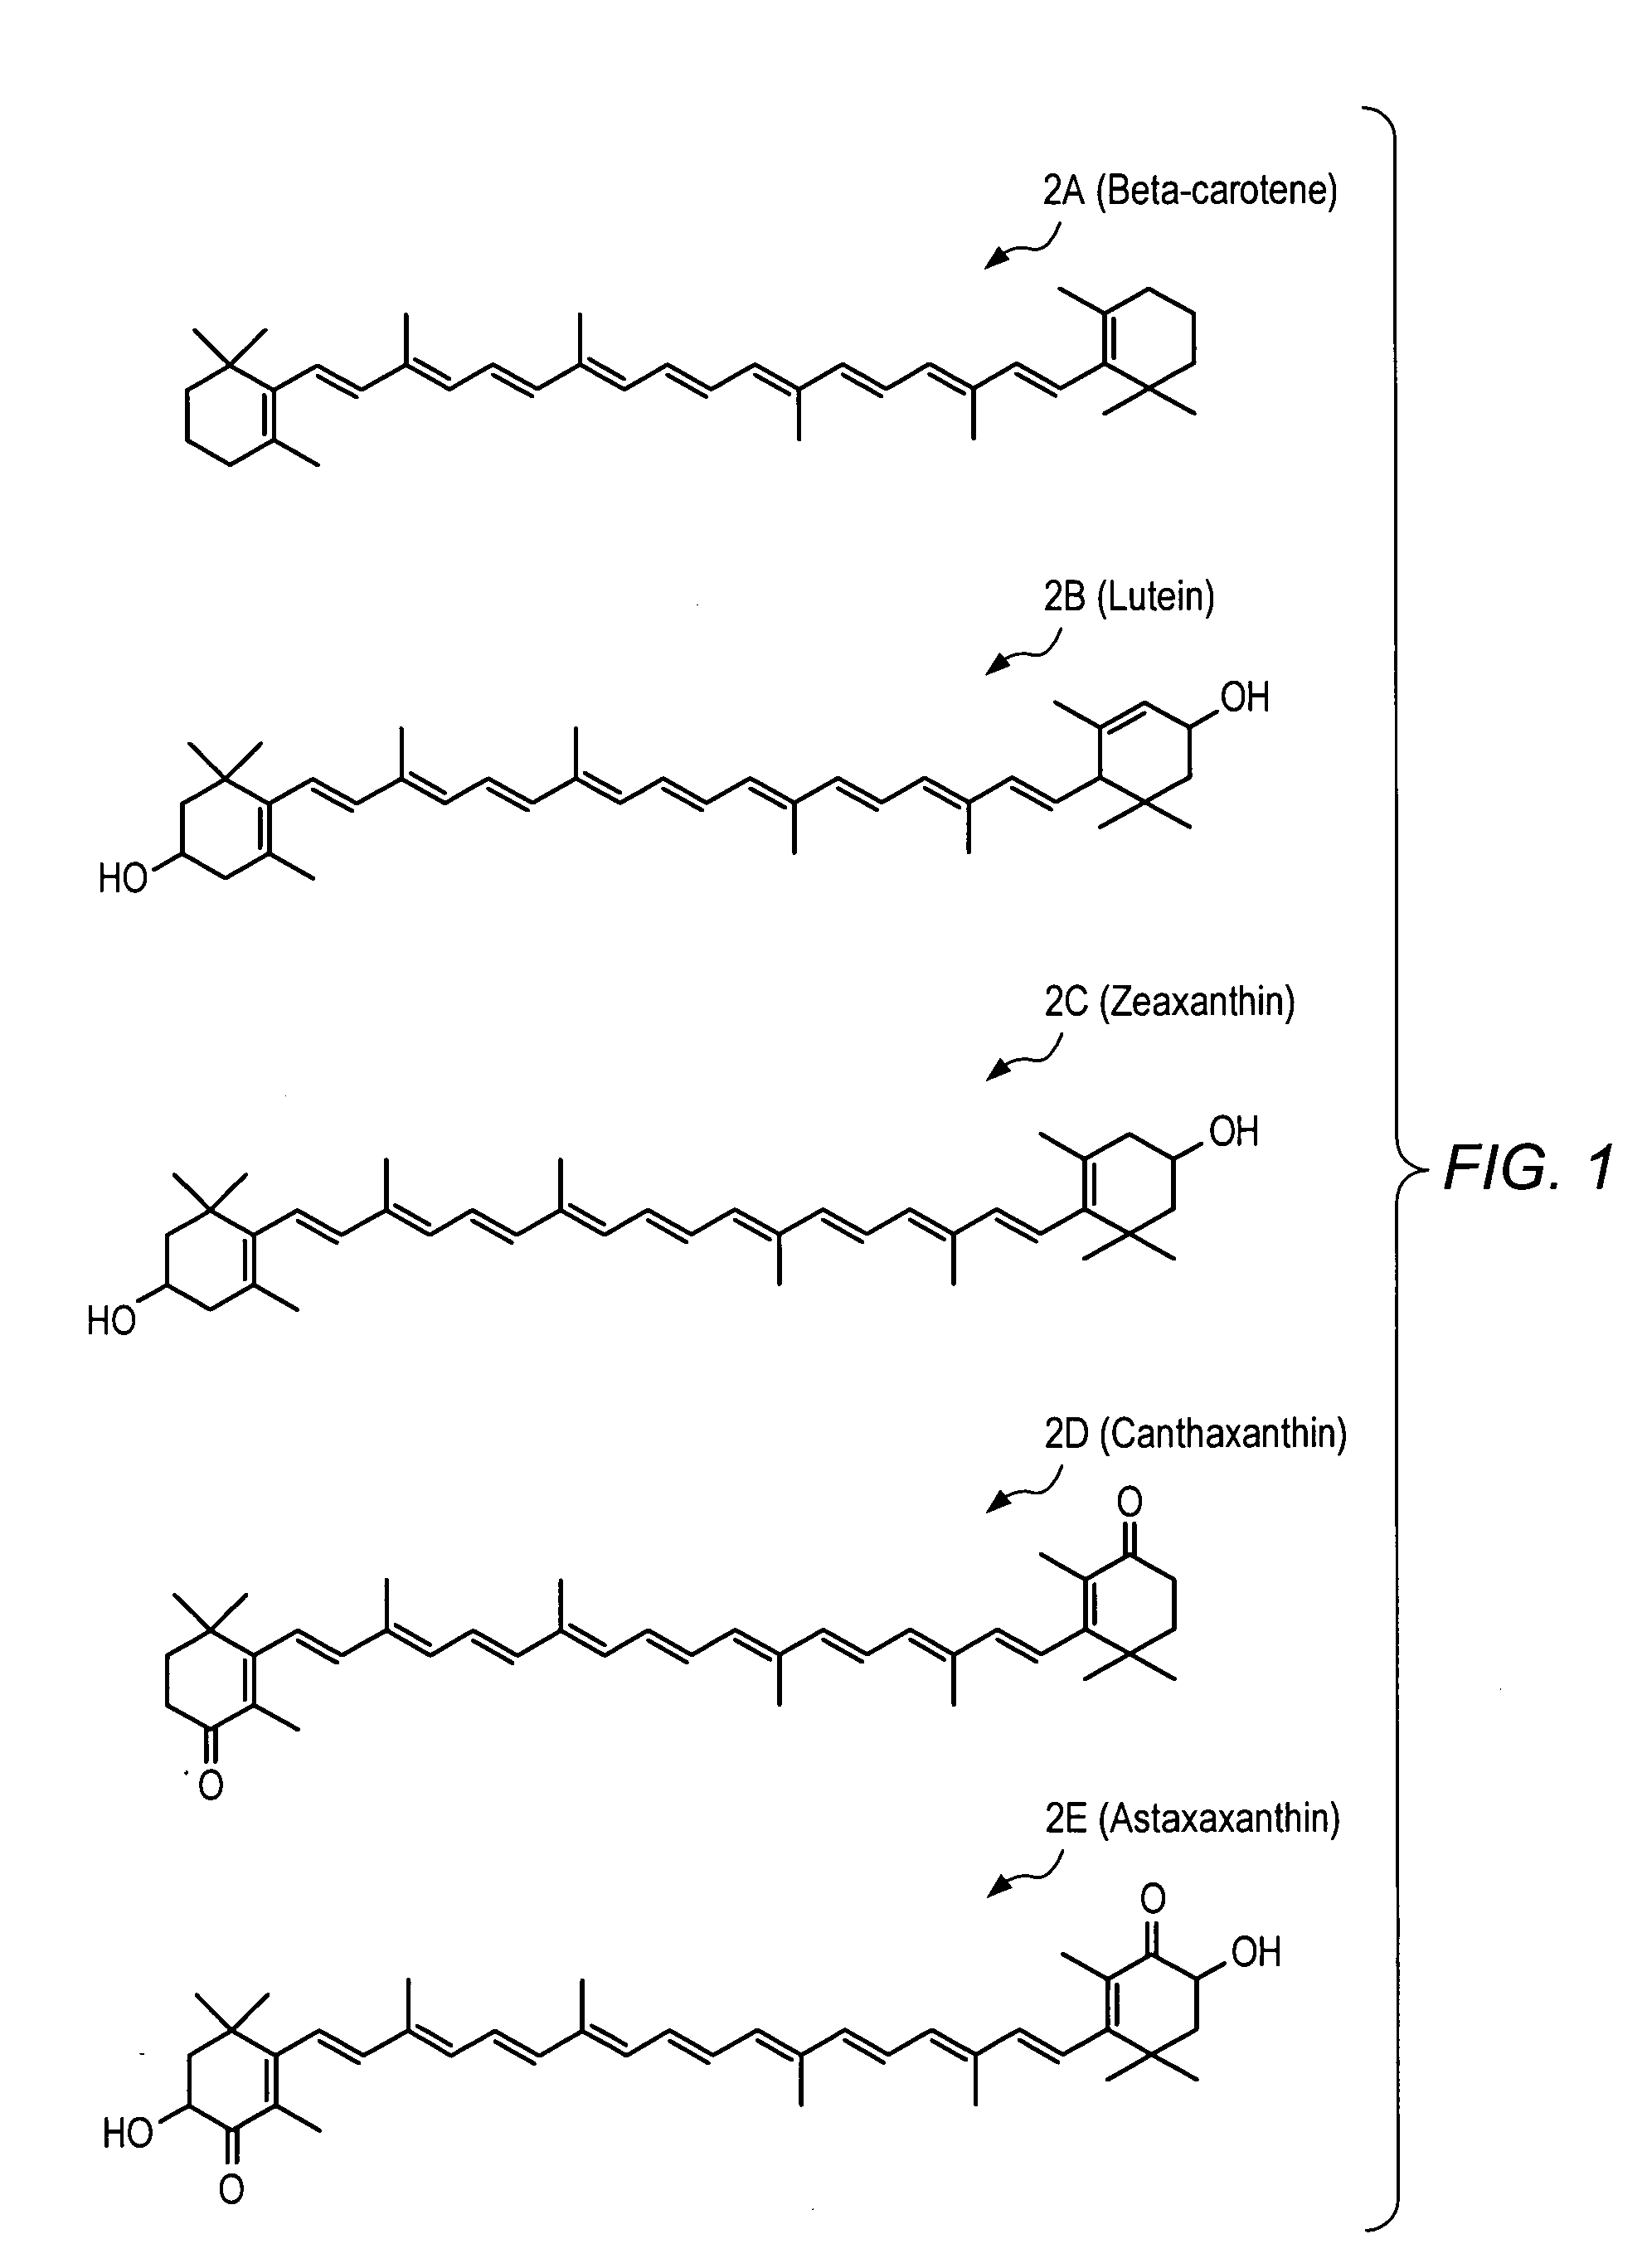 Carotenoid ether analogs or derivatives for controlling C-reactive protein levels